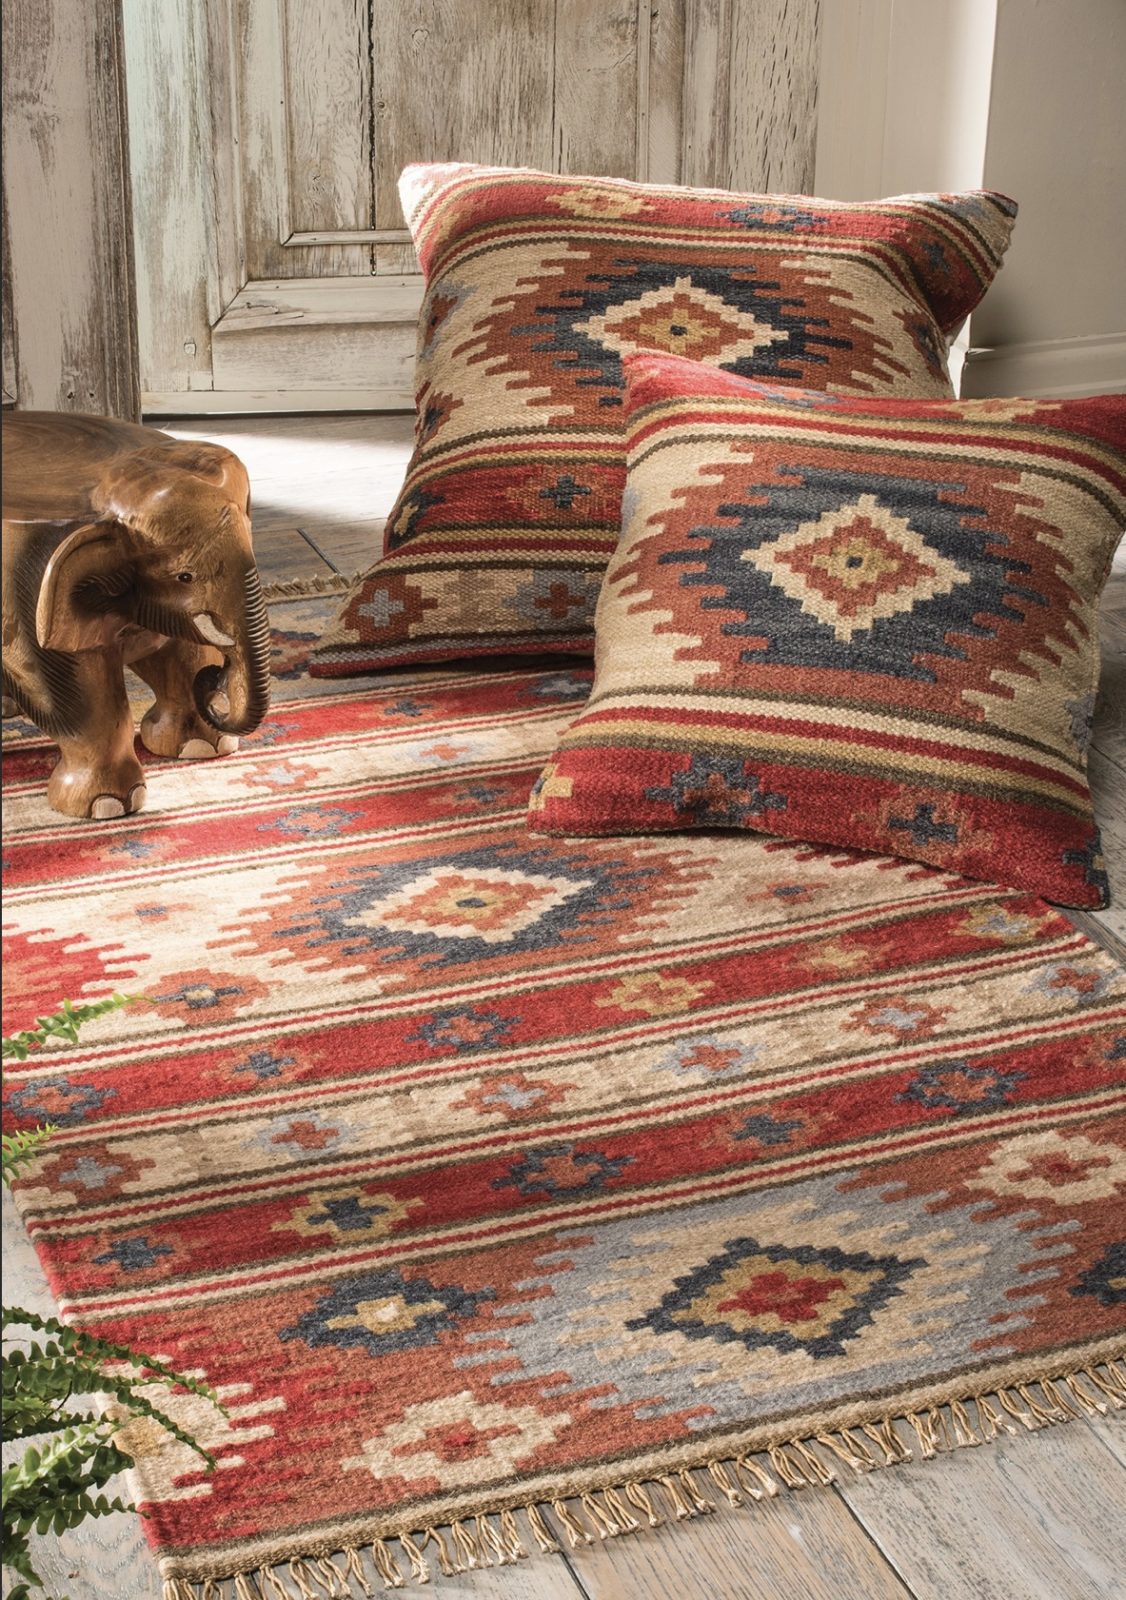 Kashi Wool Mix Luxury Rugs, Runners and Cushions